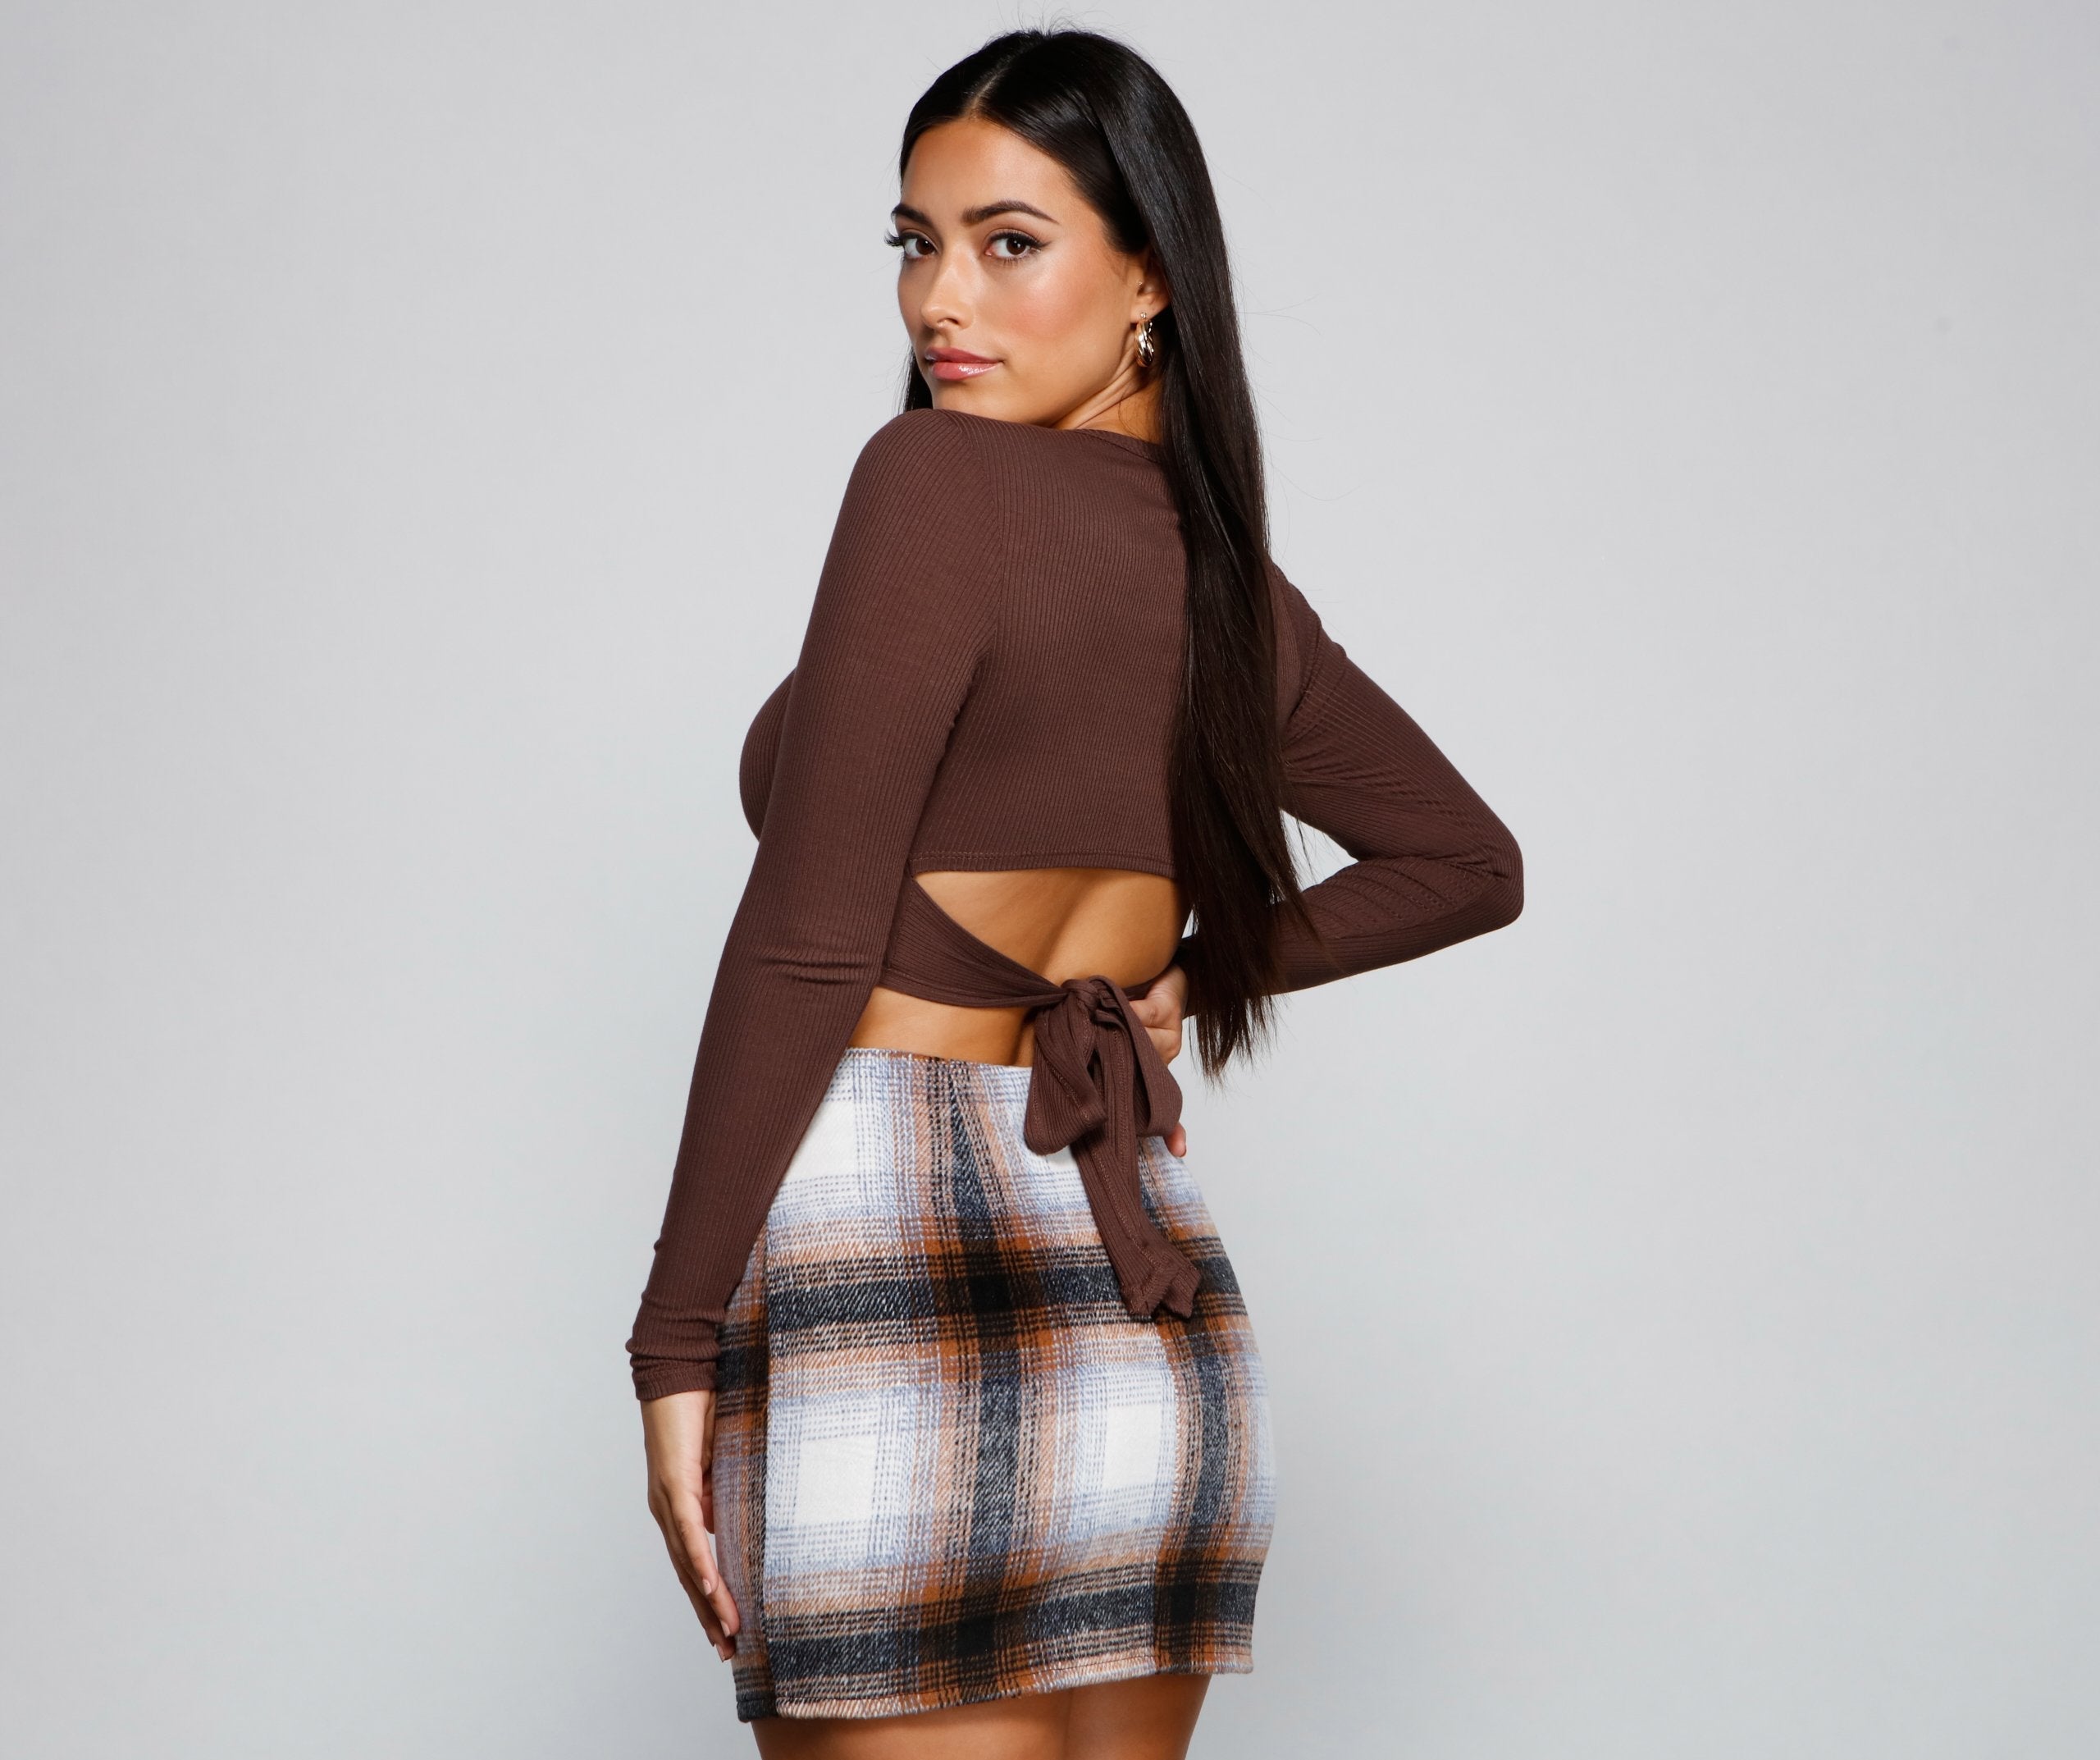 Go With It Ribbed Knit Crop Top - Lady Occasions